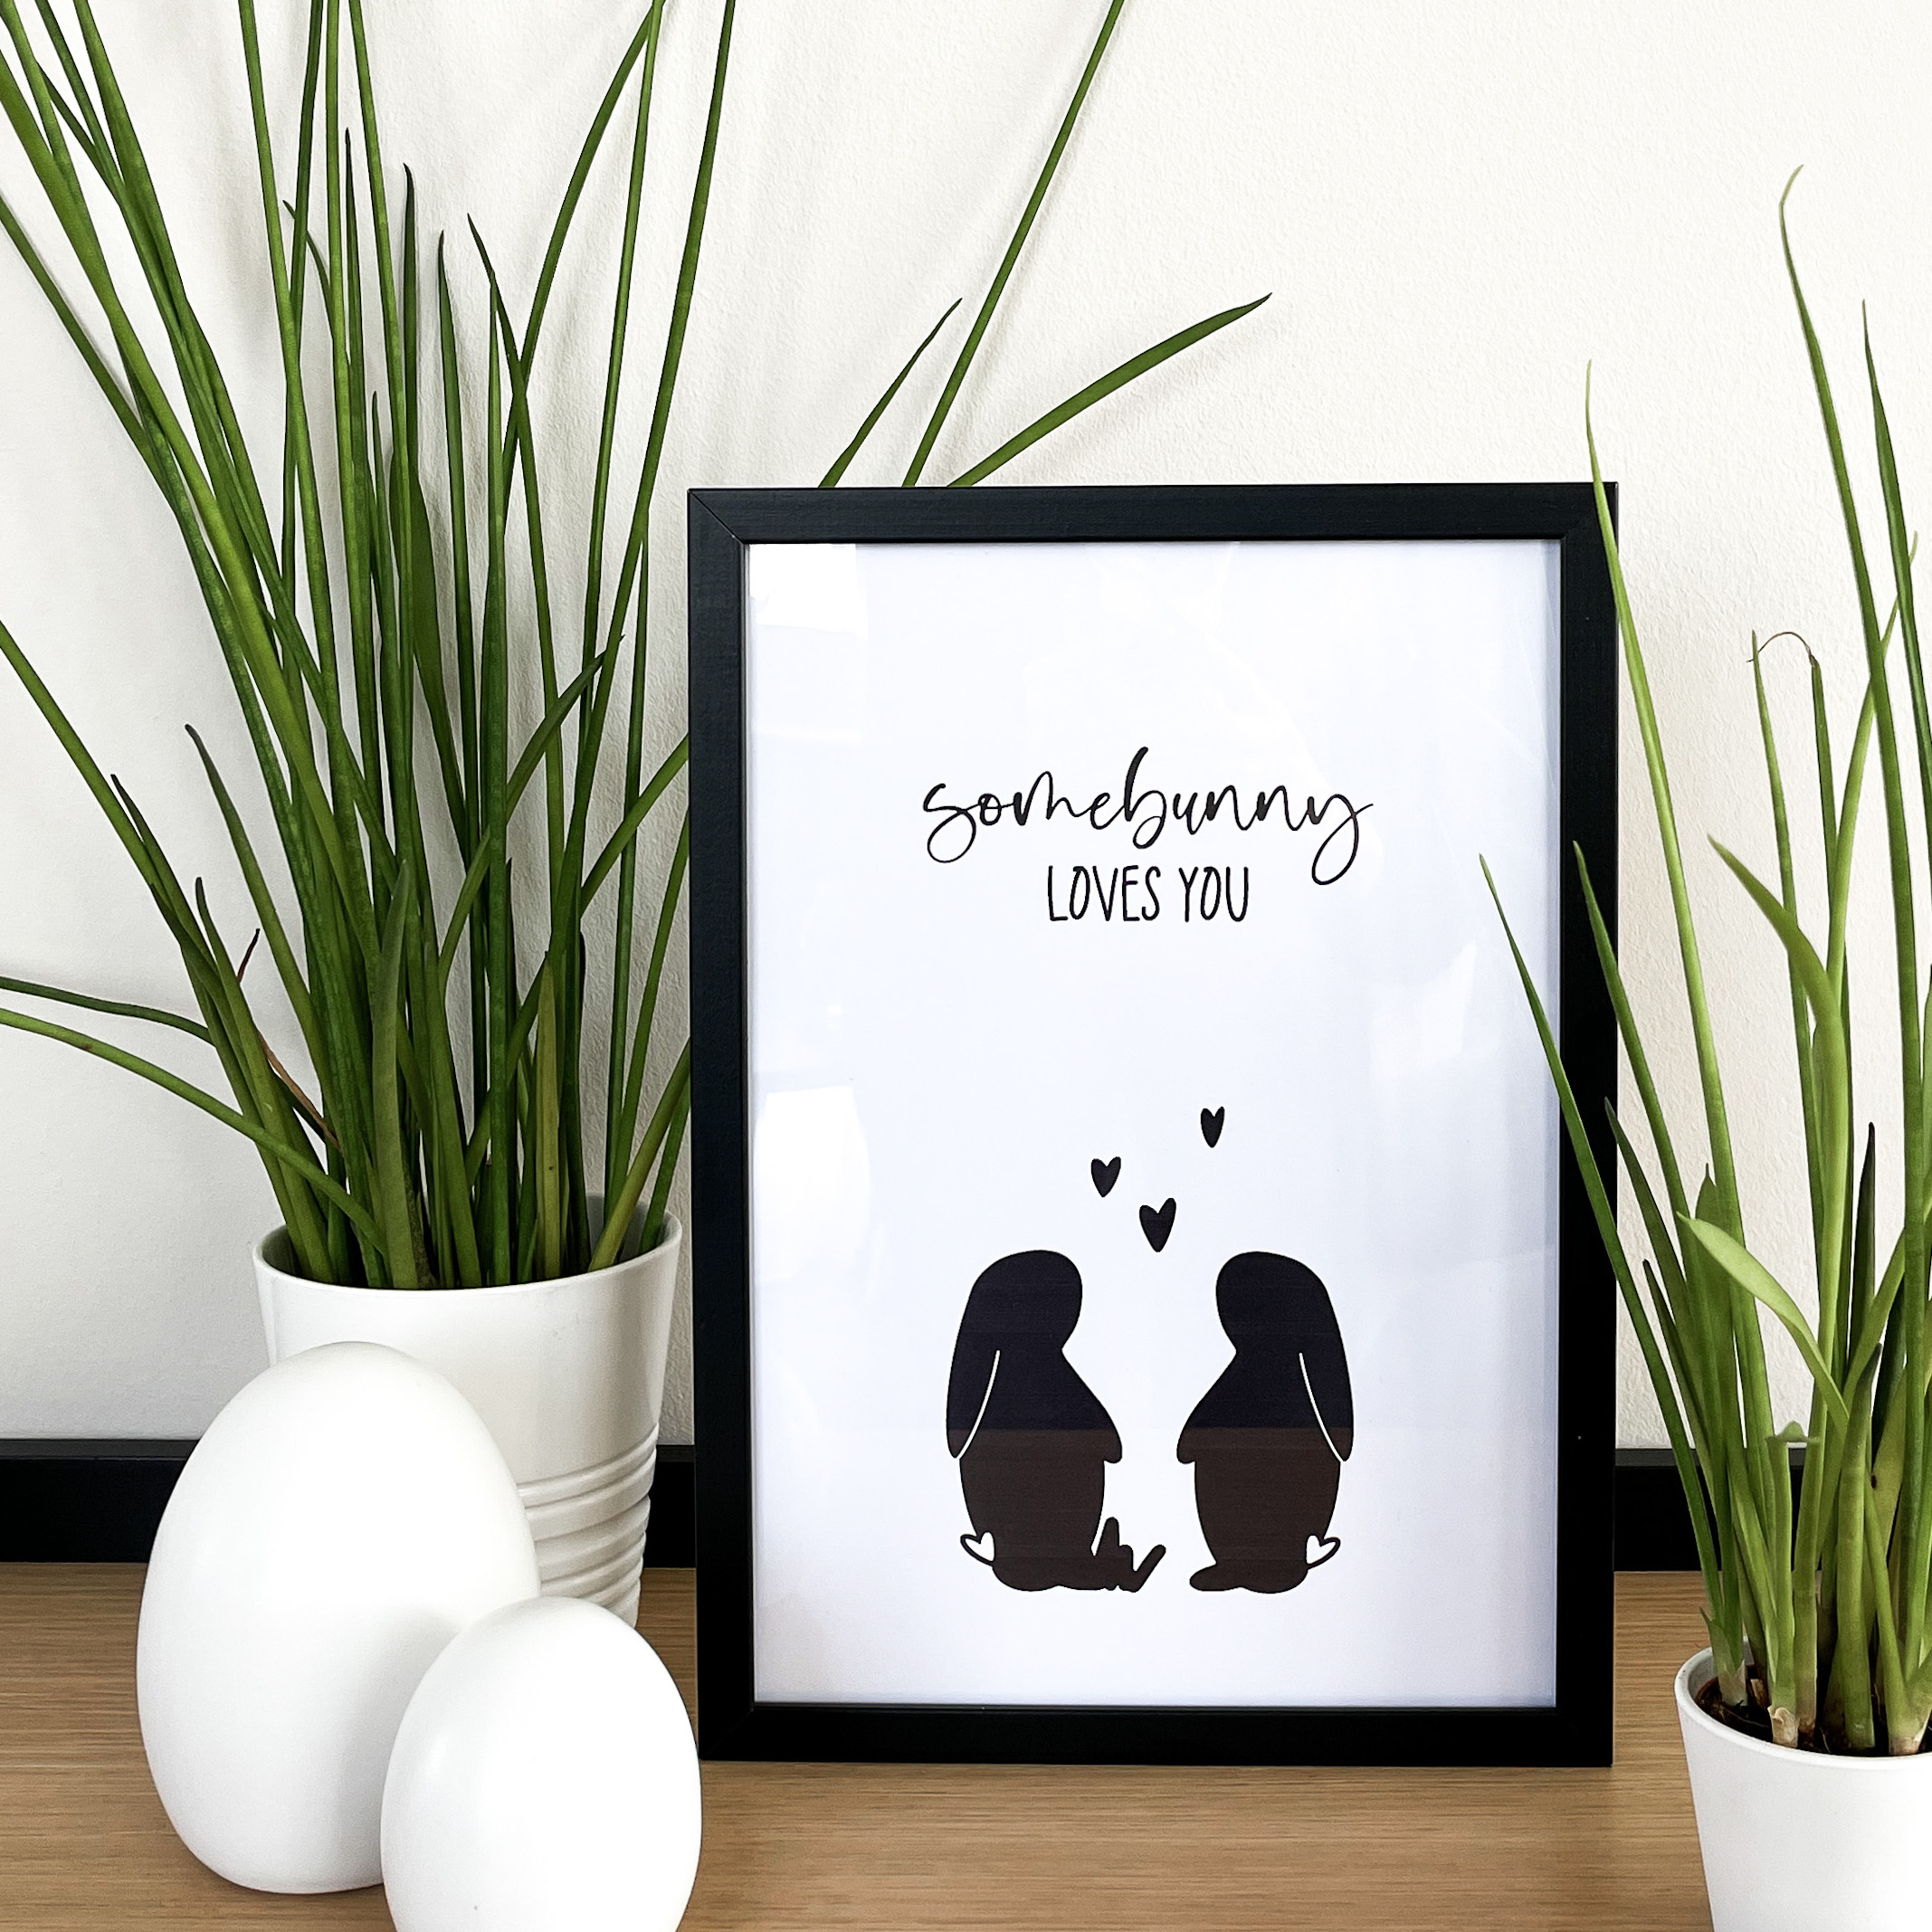 Print (DATEI) "somebunny loves you"